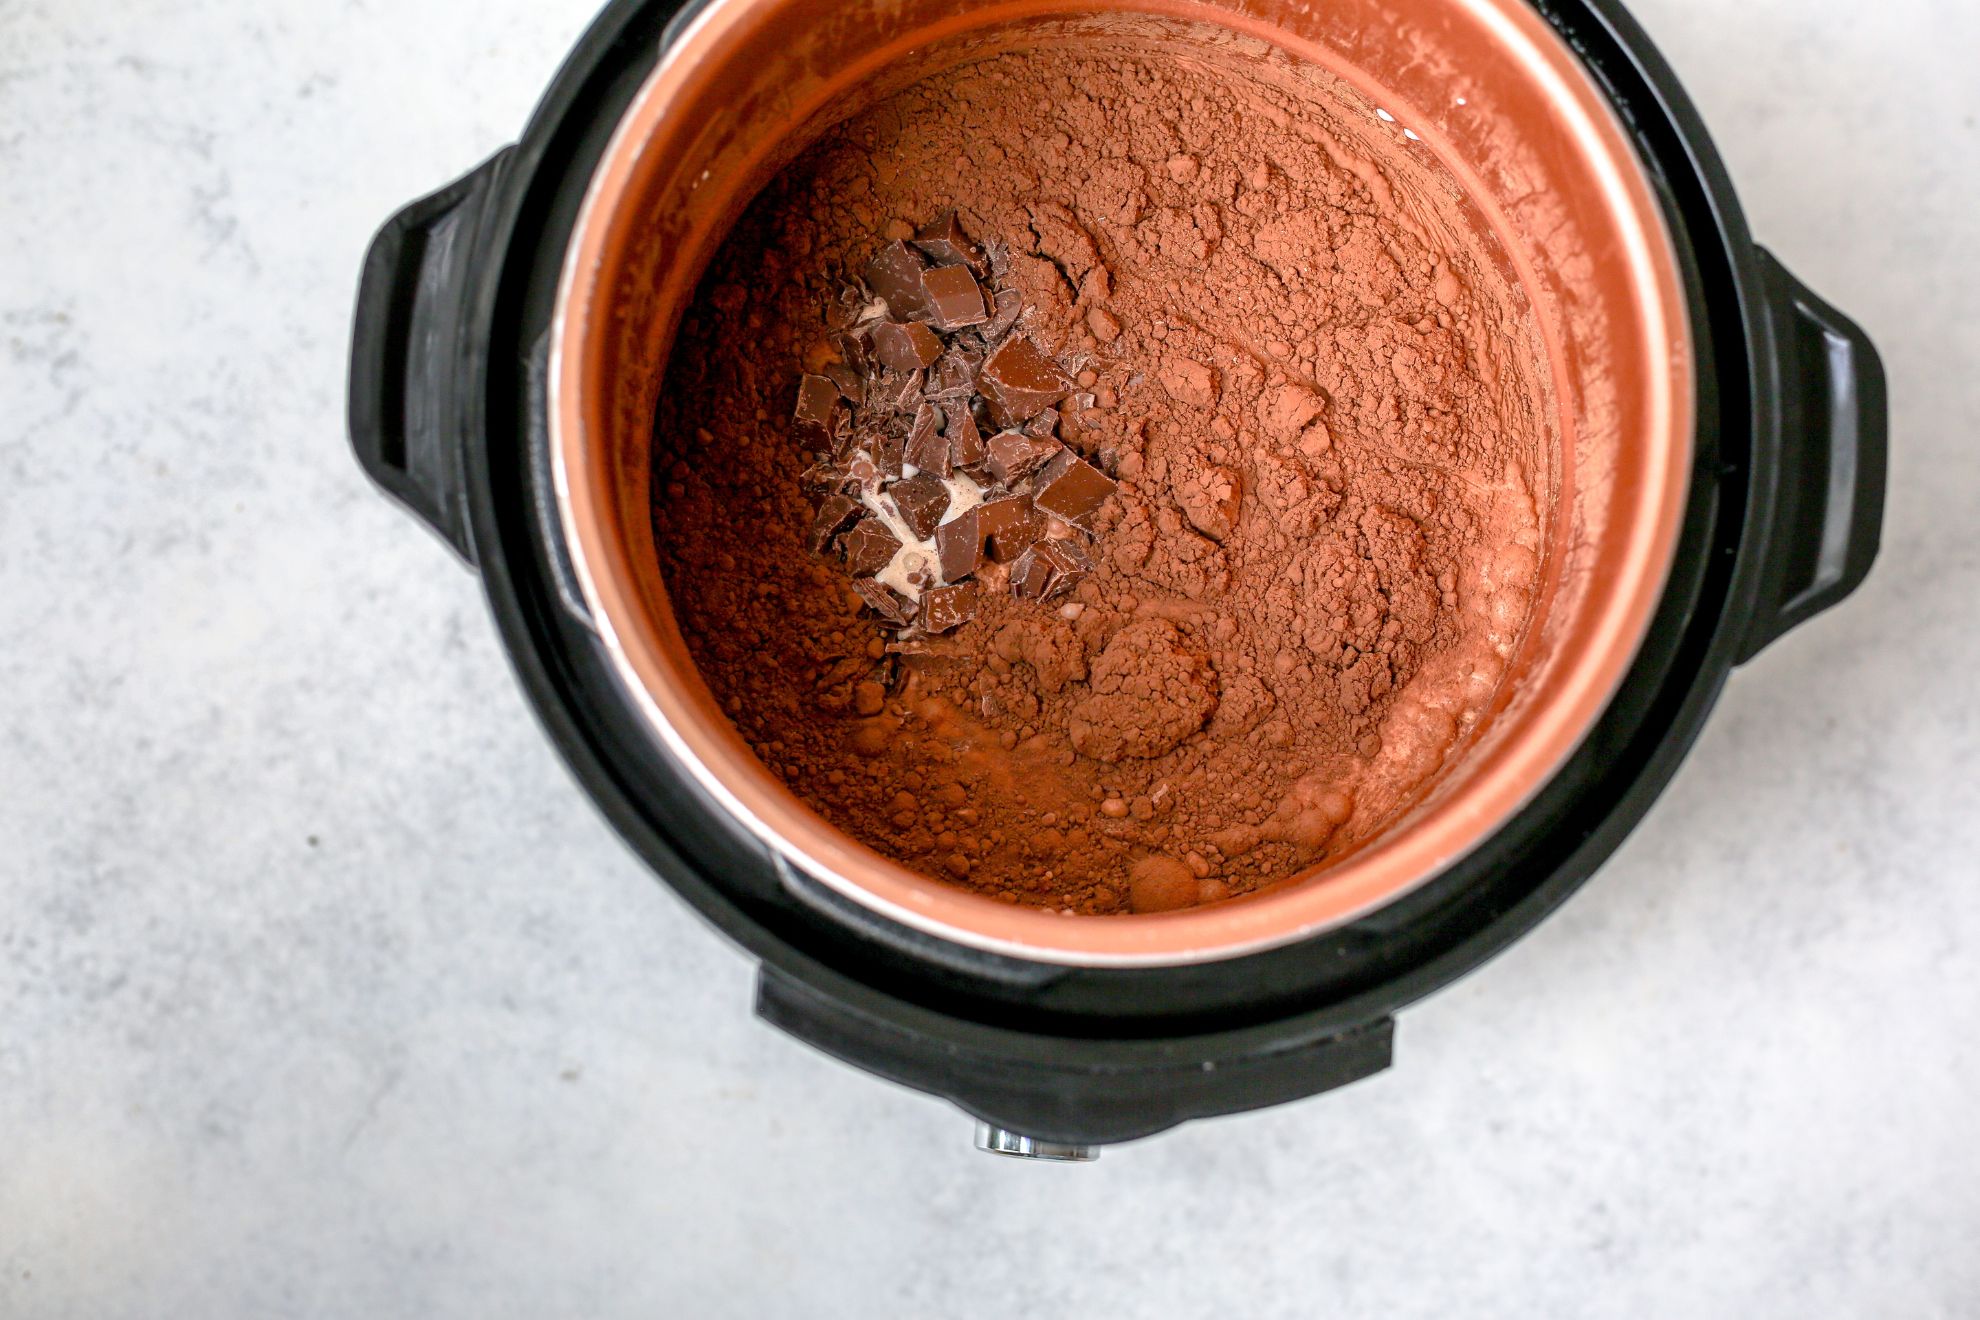 This is an overhead horizontal image looking into an instant pot with cocoa powder, chopped chocolate and milk in it, not yet stirred or combined. The instant pot is on a light grey surface.